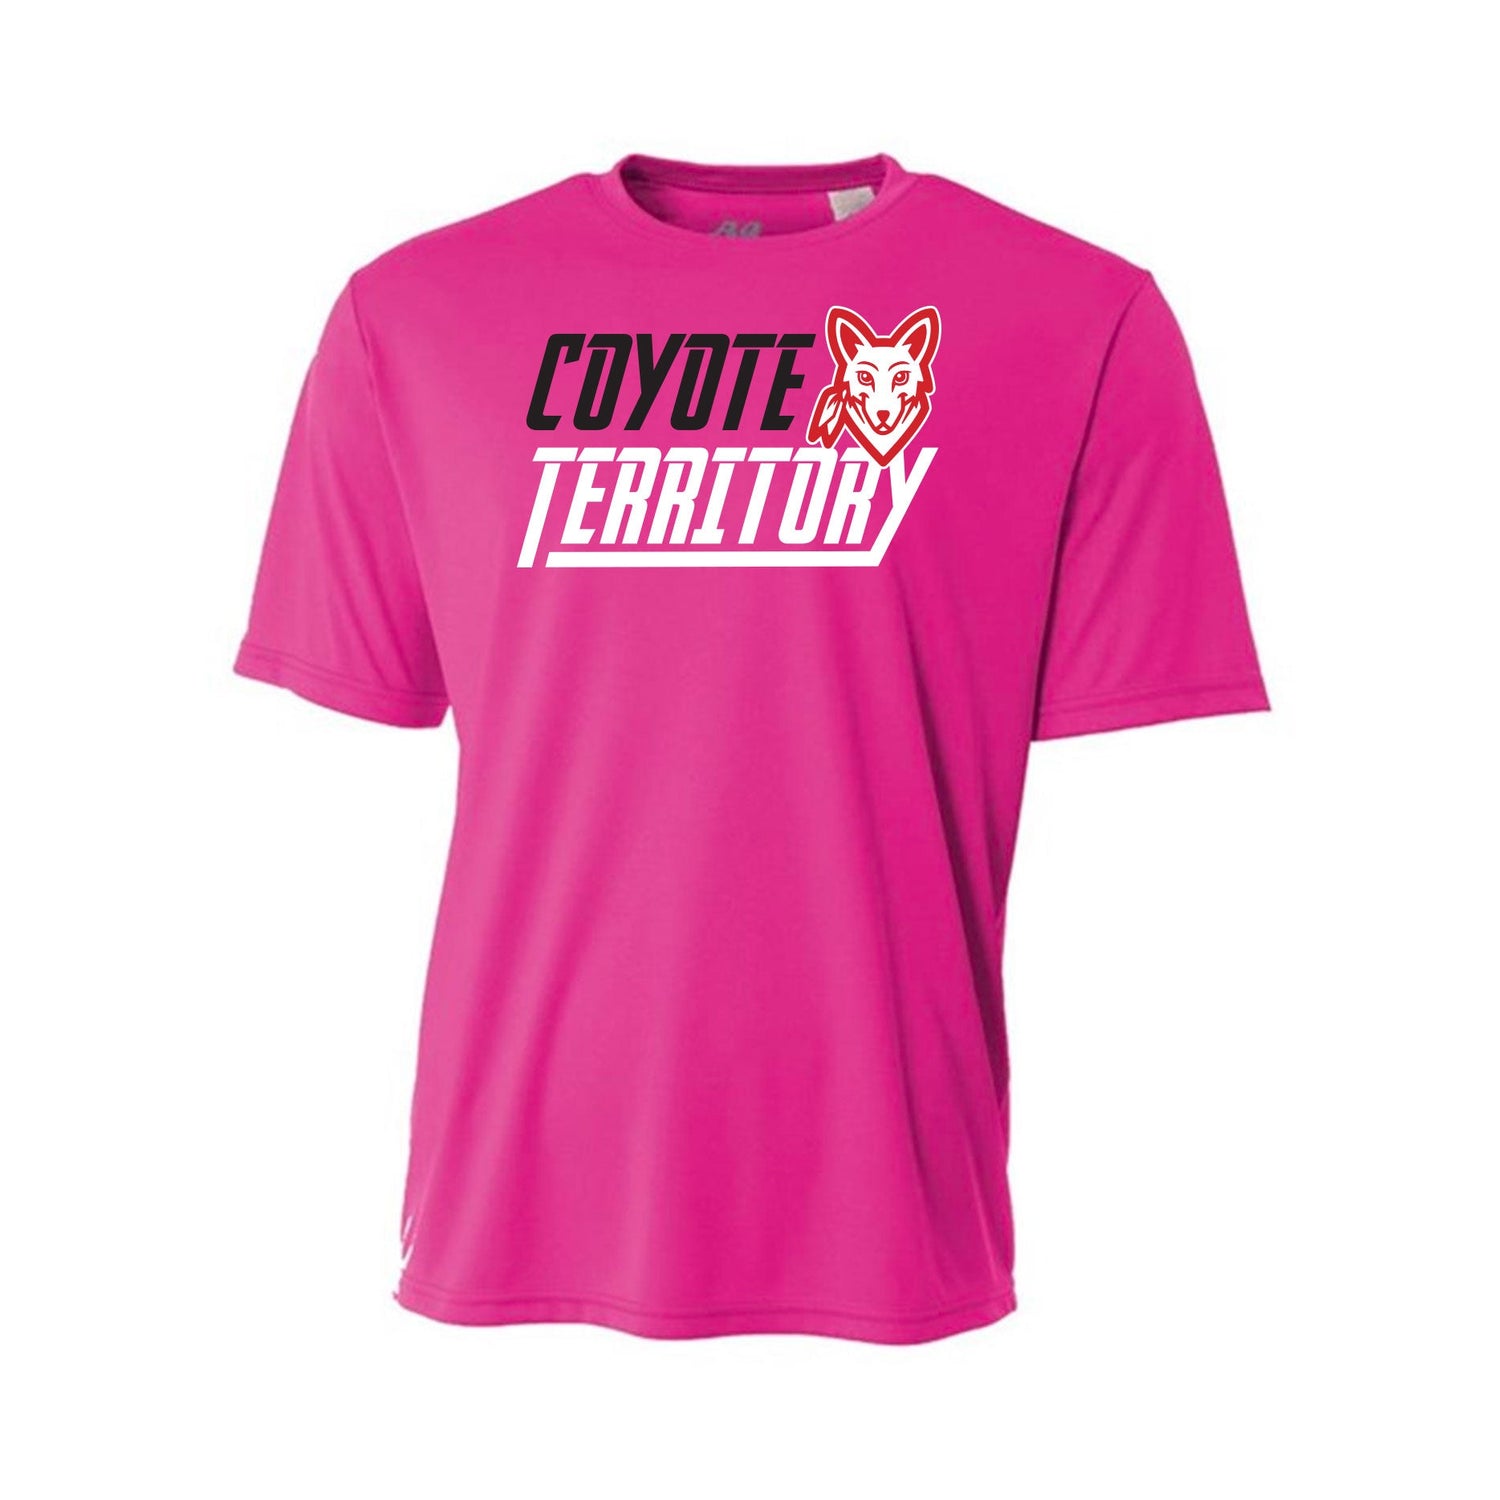 CANYON VIEW TERRITORY DESIGN YOUTH PERFORMANCE TEE